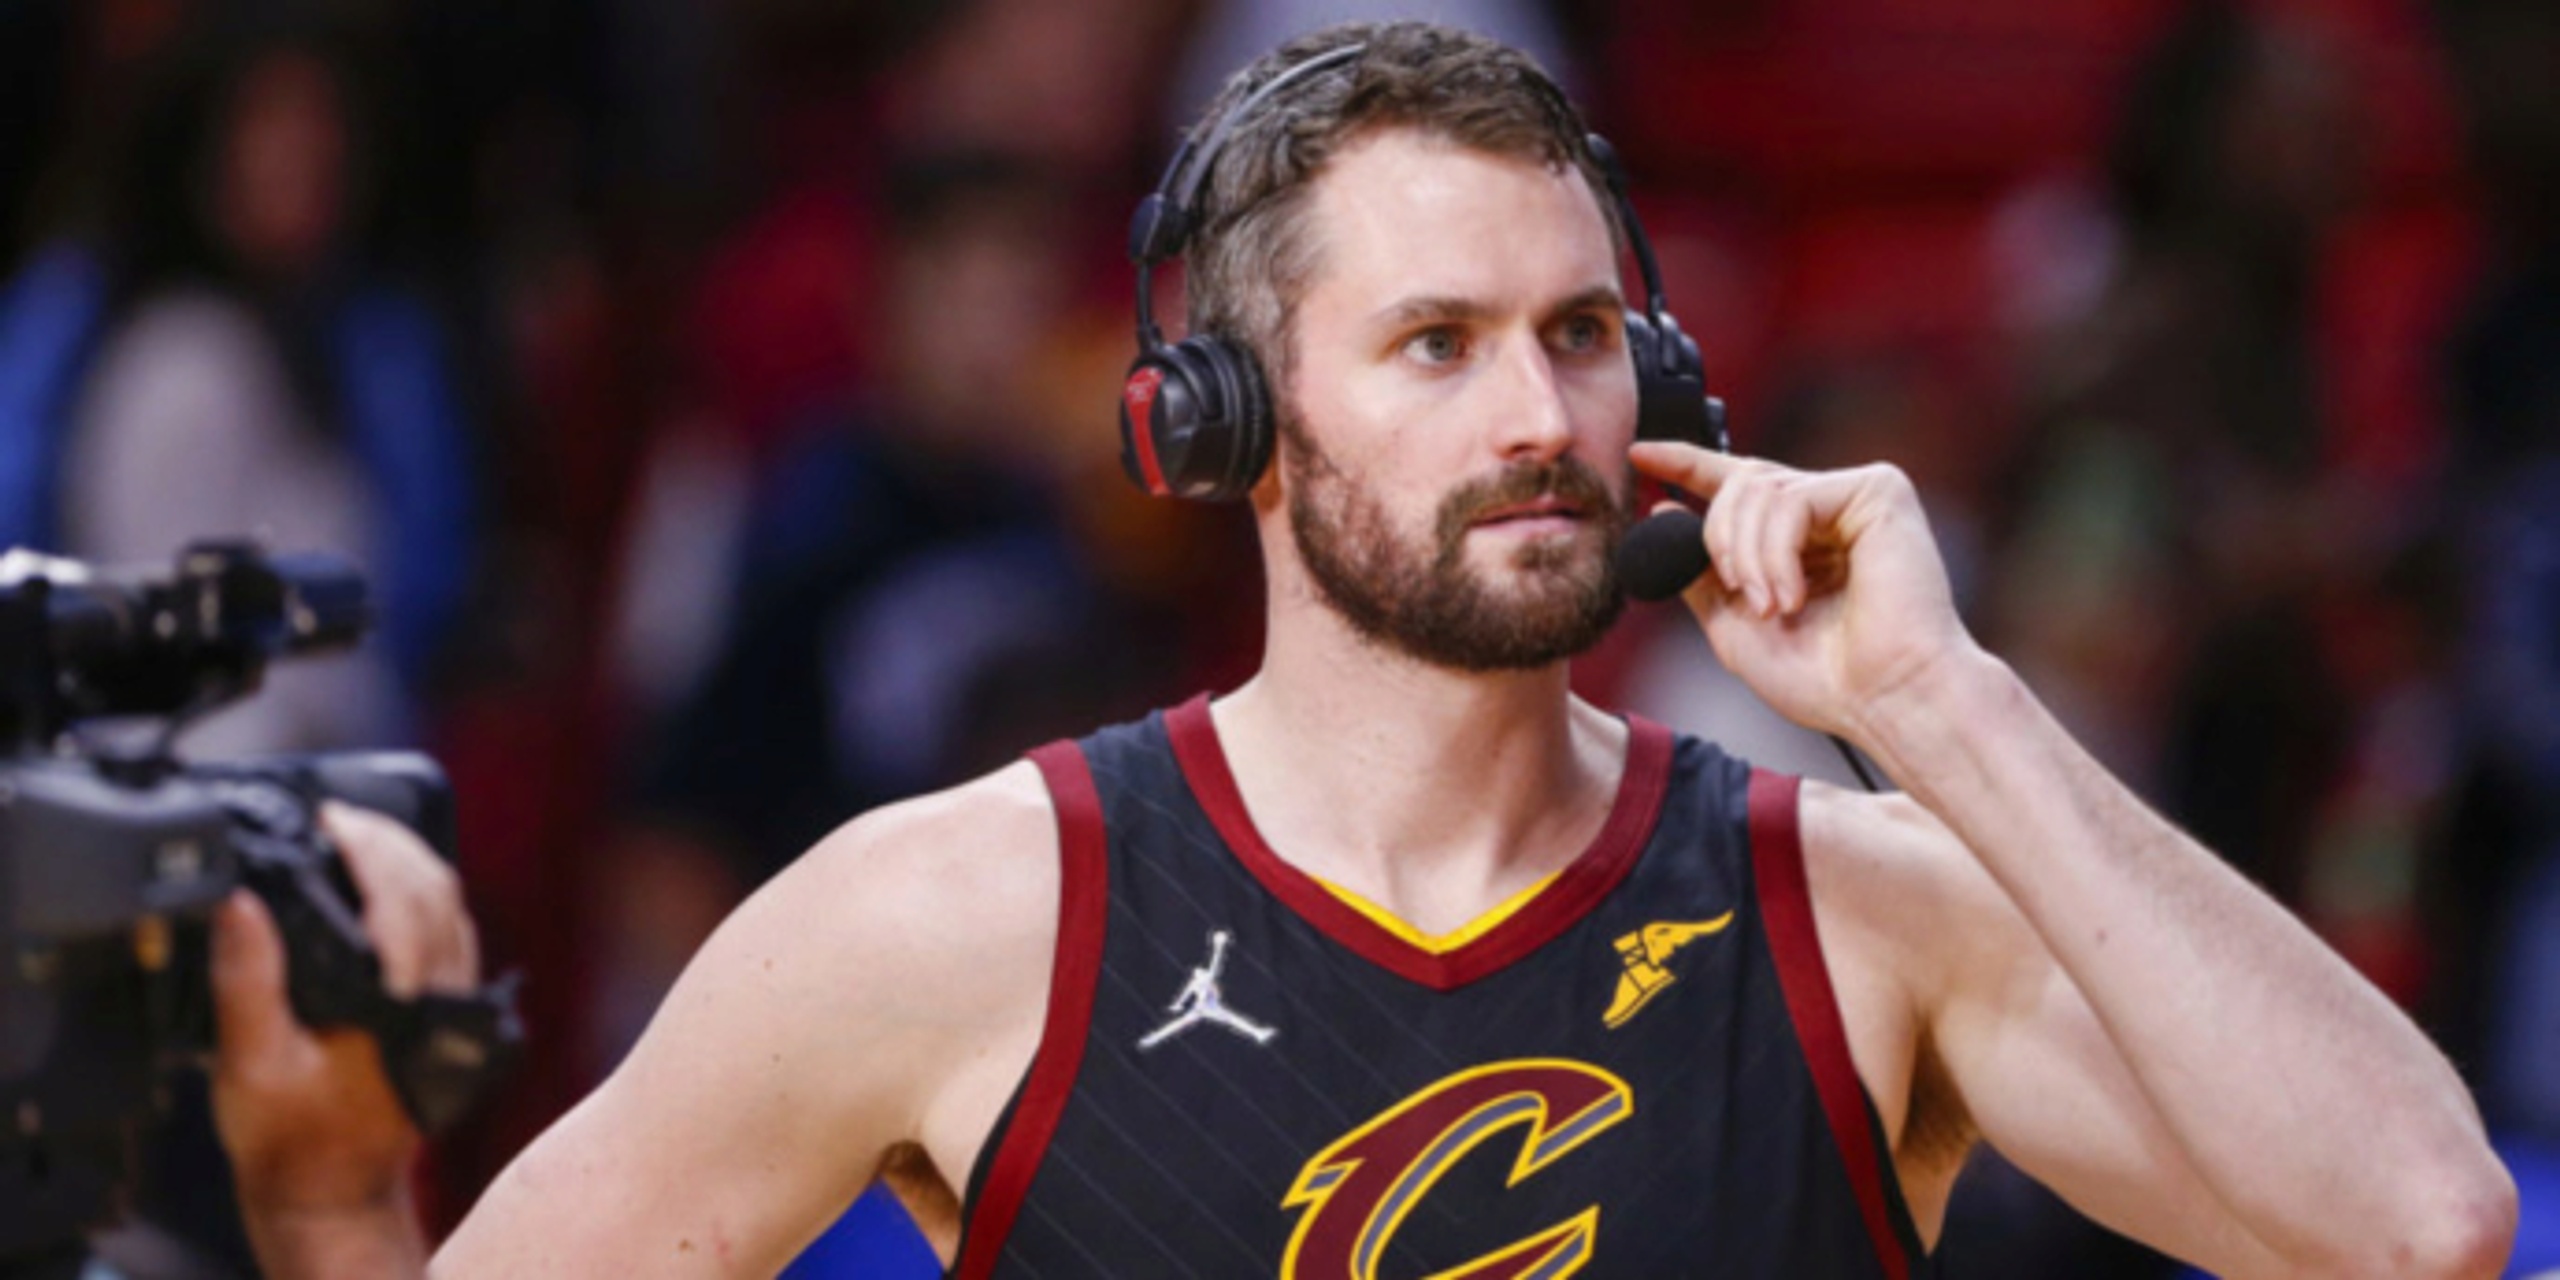 NBA's Kevin Love honored for mental health advocacy